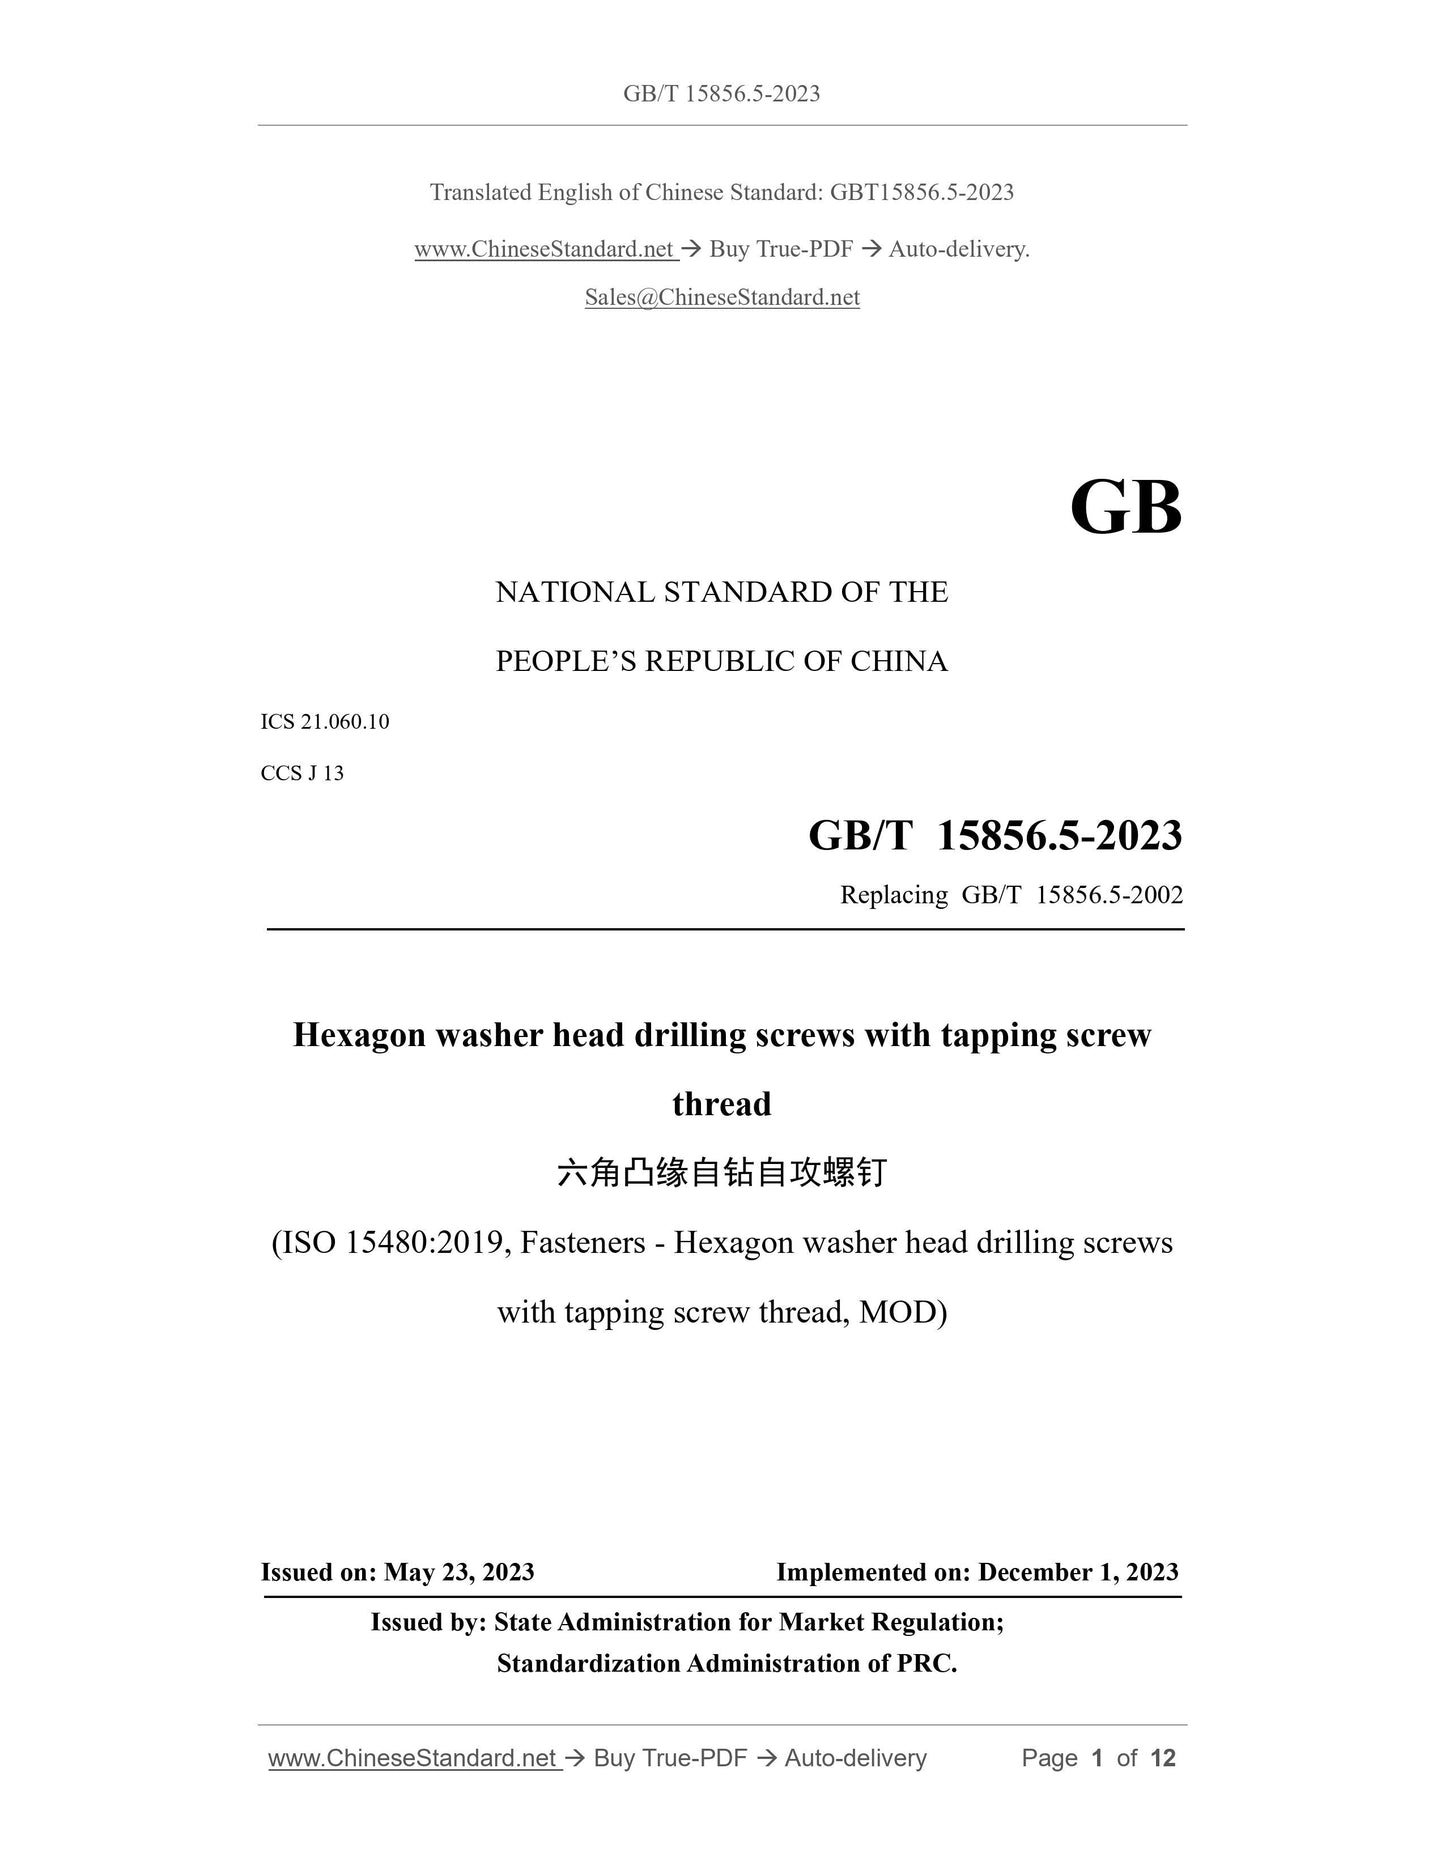 GB/T 15856.5-2023 Page 1